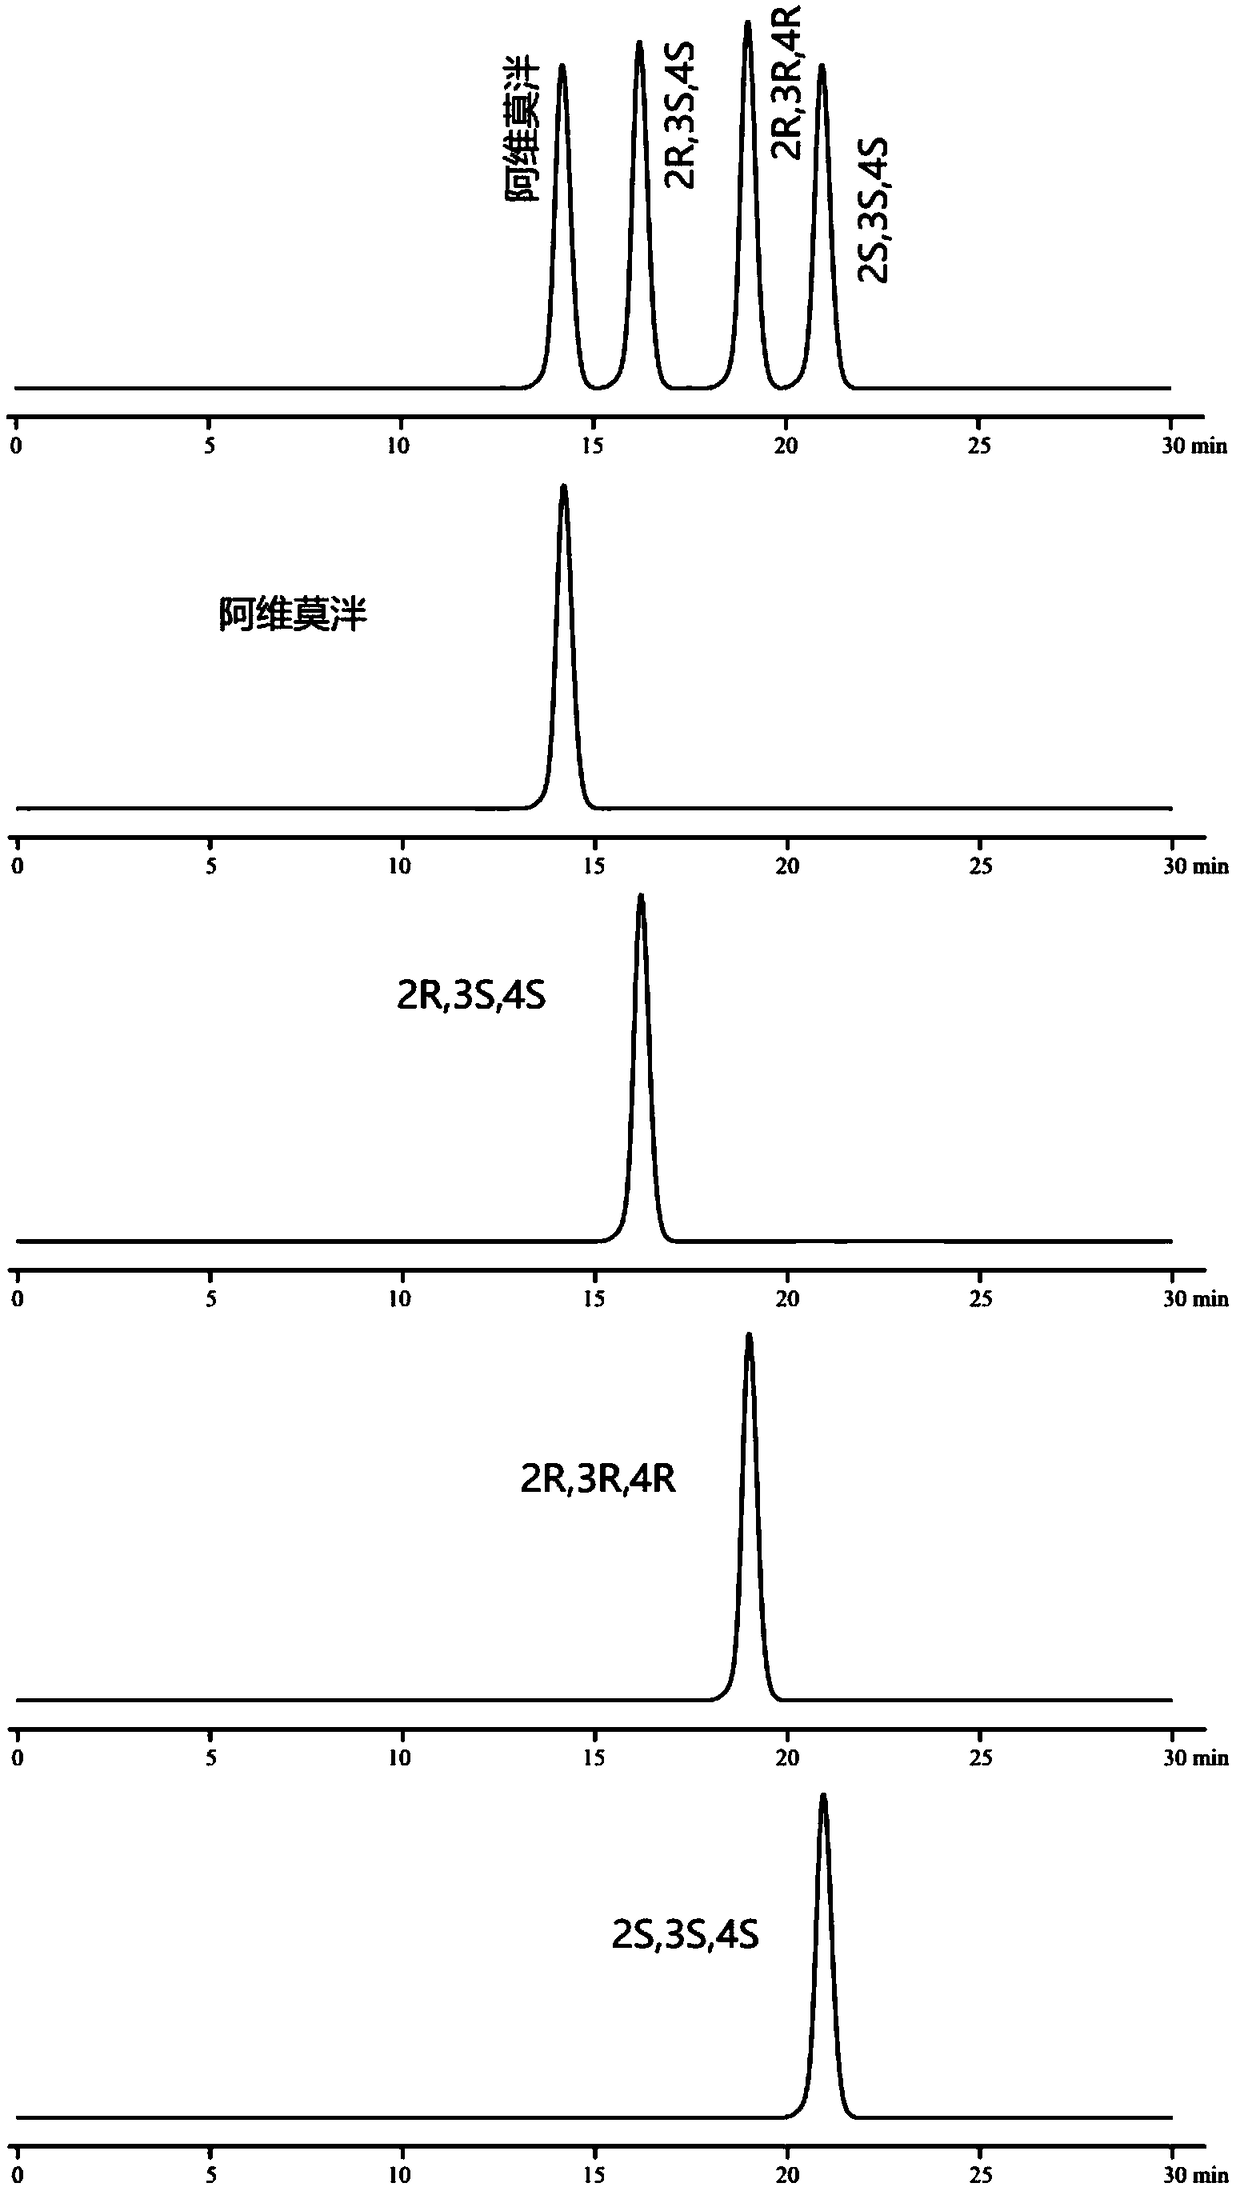 HPLC method for separating alvimopan and optical isomers thereof